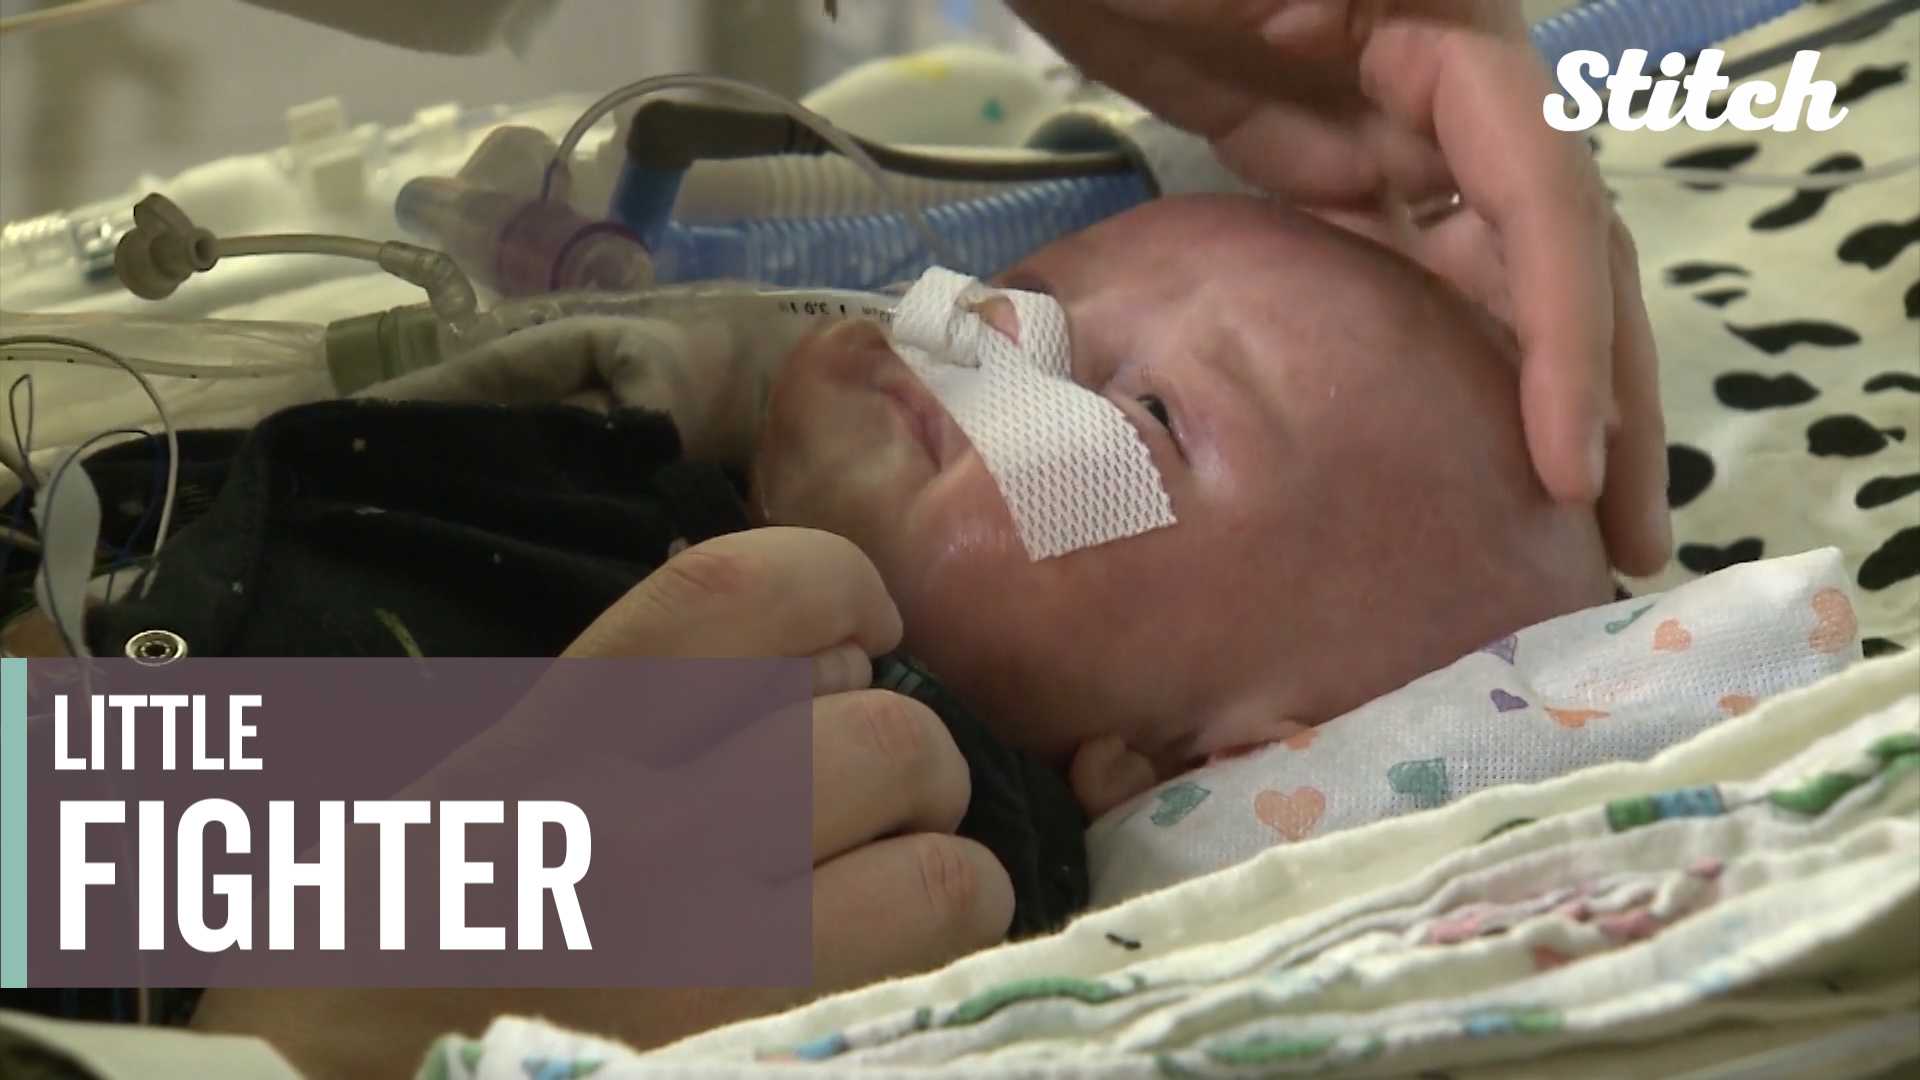 Little fighter: 4-month-old boy survives two open-heart surgeries